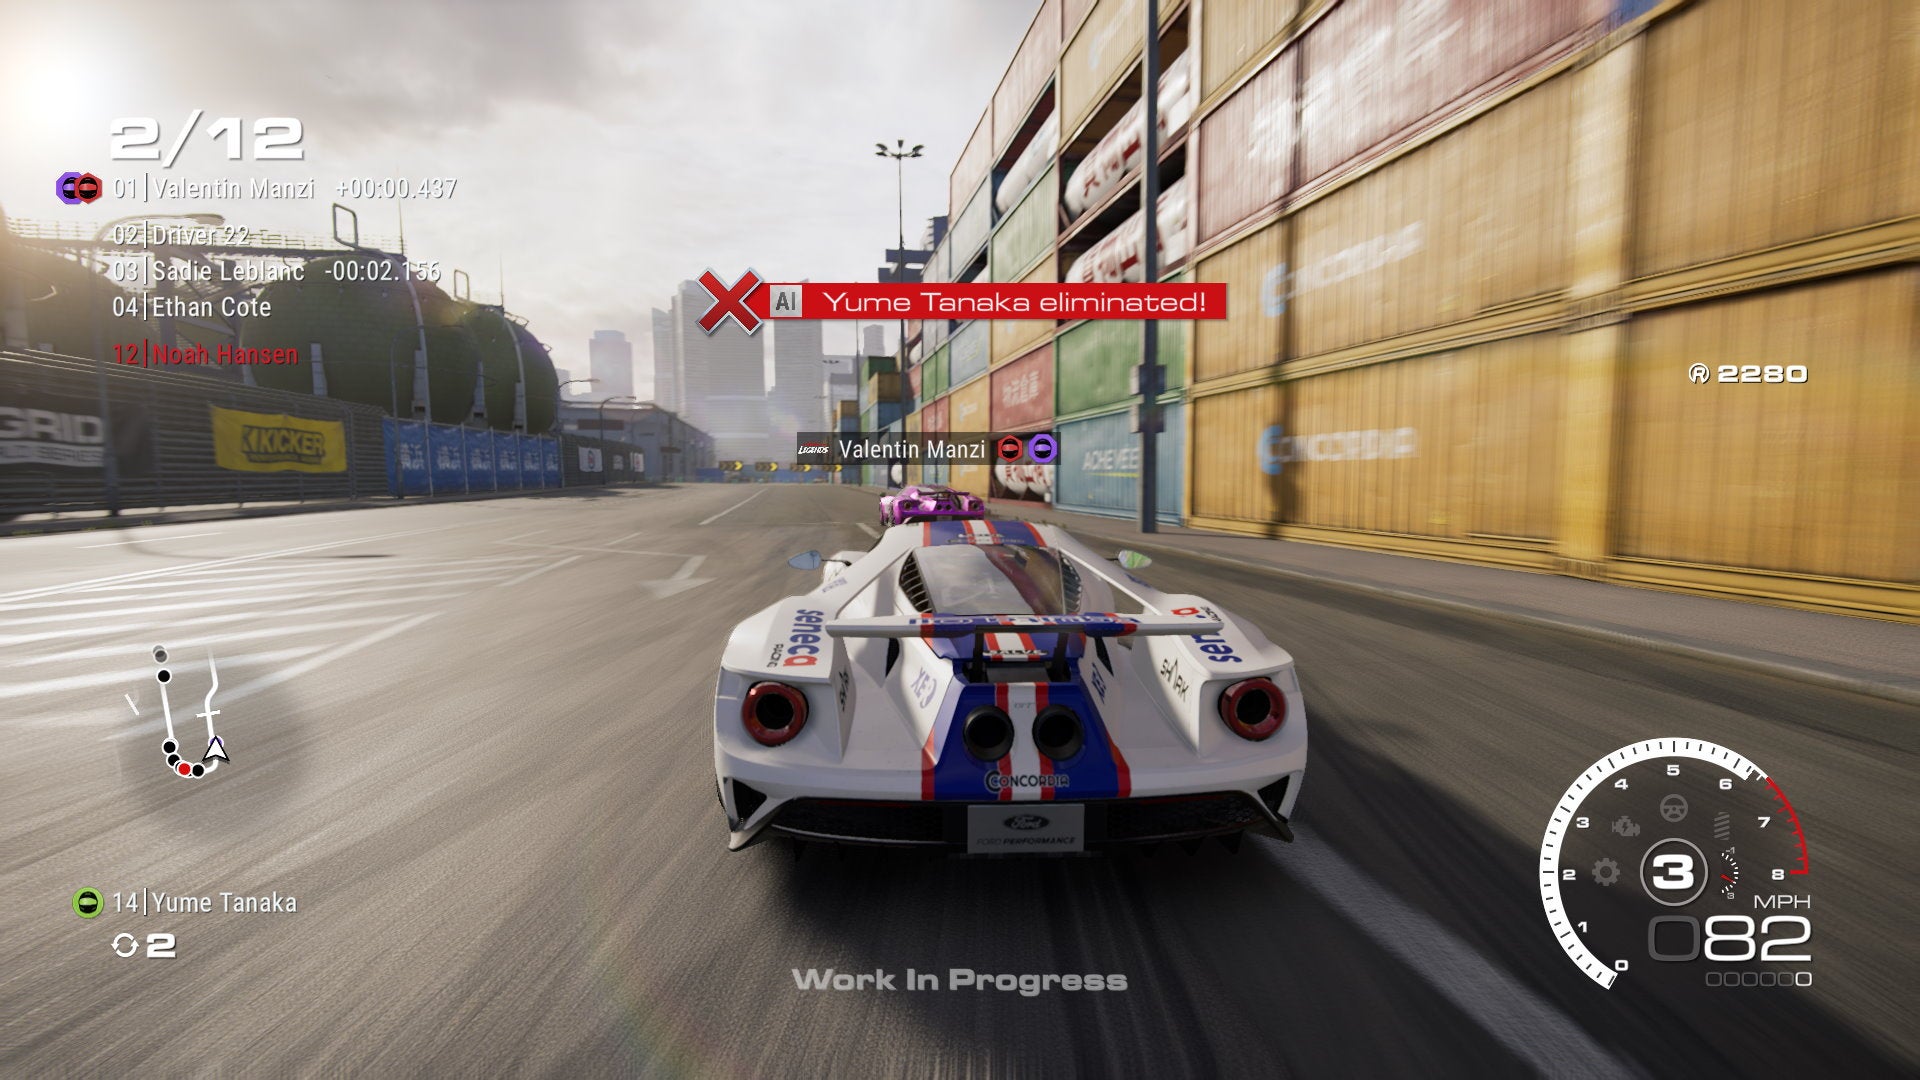 A white race car drives through a port after eliminating Yume Tanaka from the race in GRID Legends